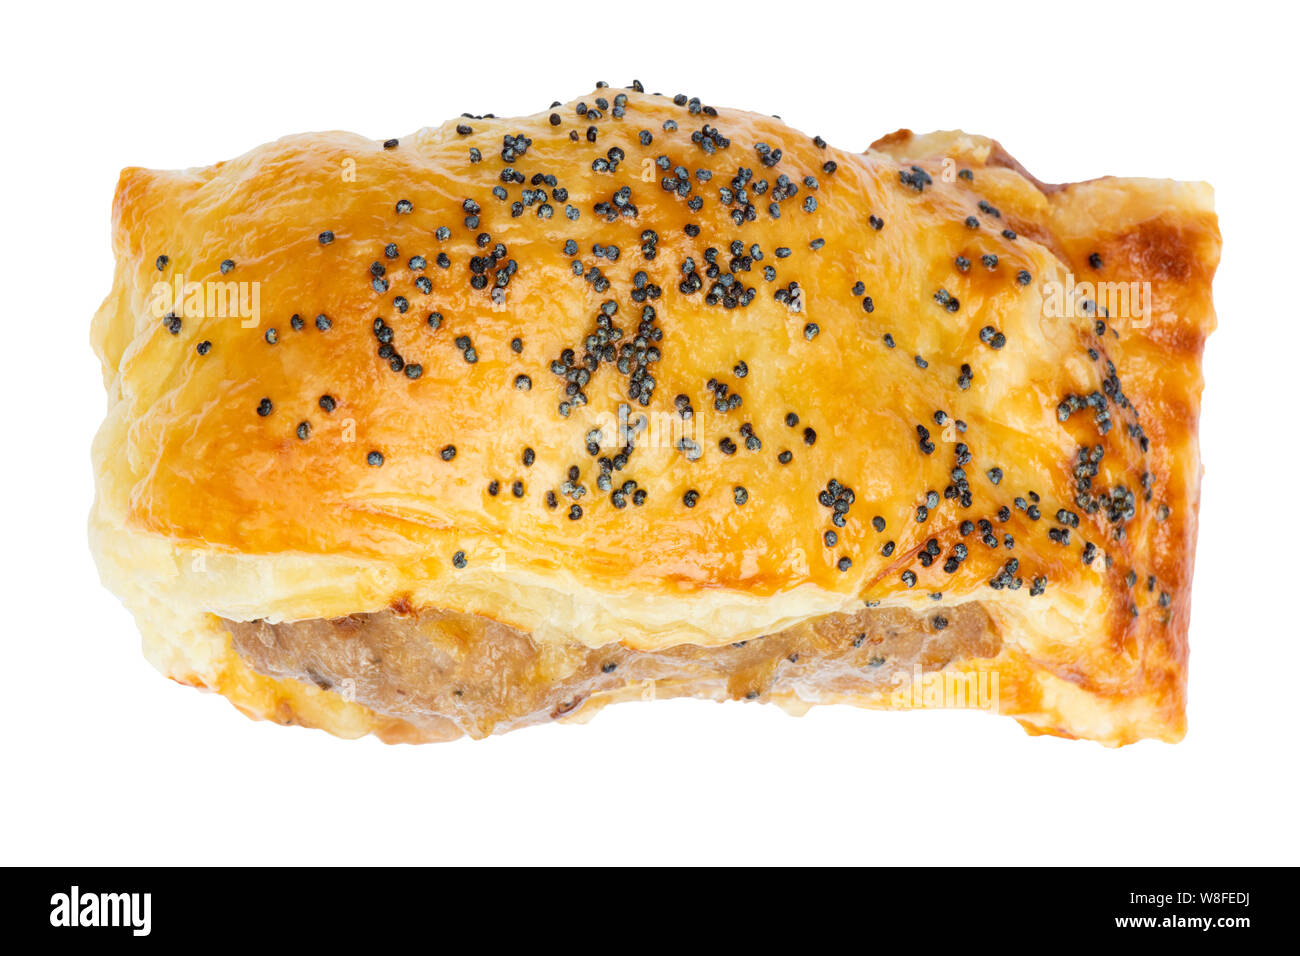 Home made sausage roll with poppy seeds, cut out or isolated on a white background, UK. Stock Photo